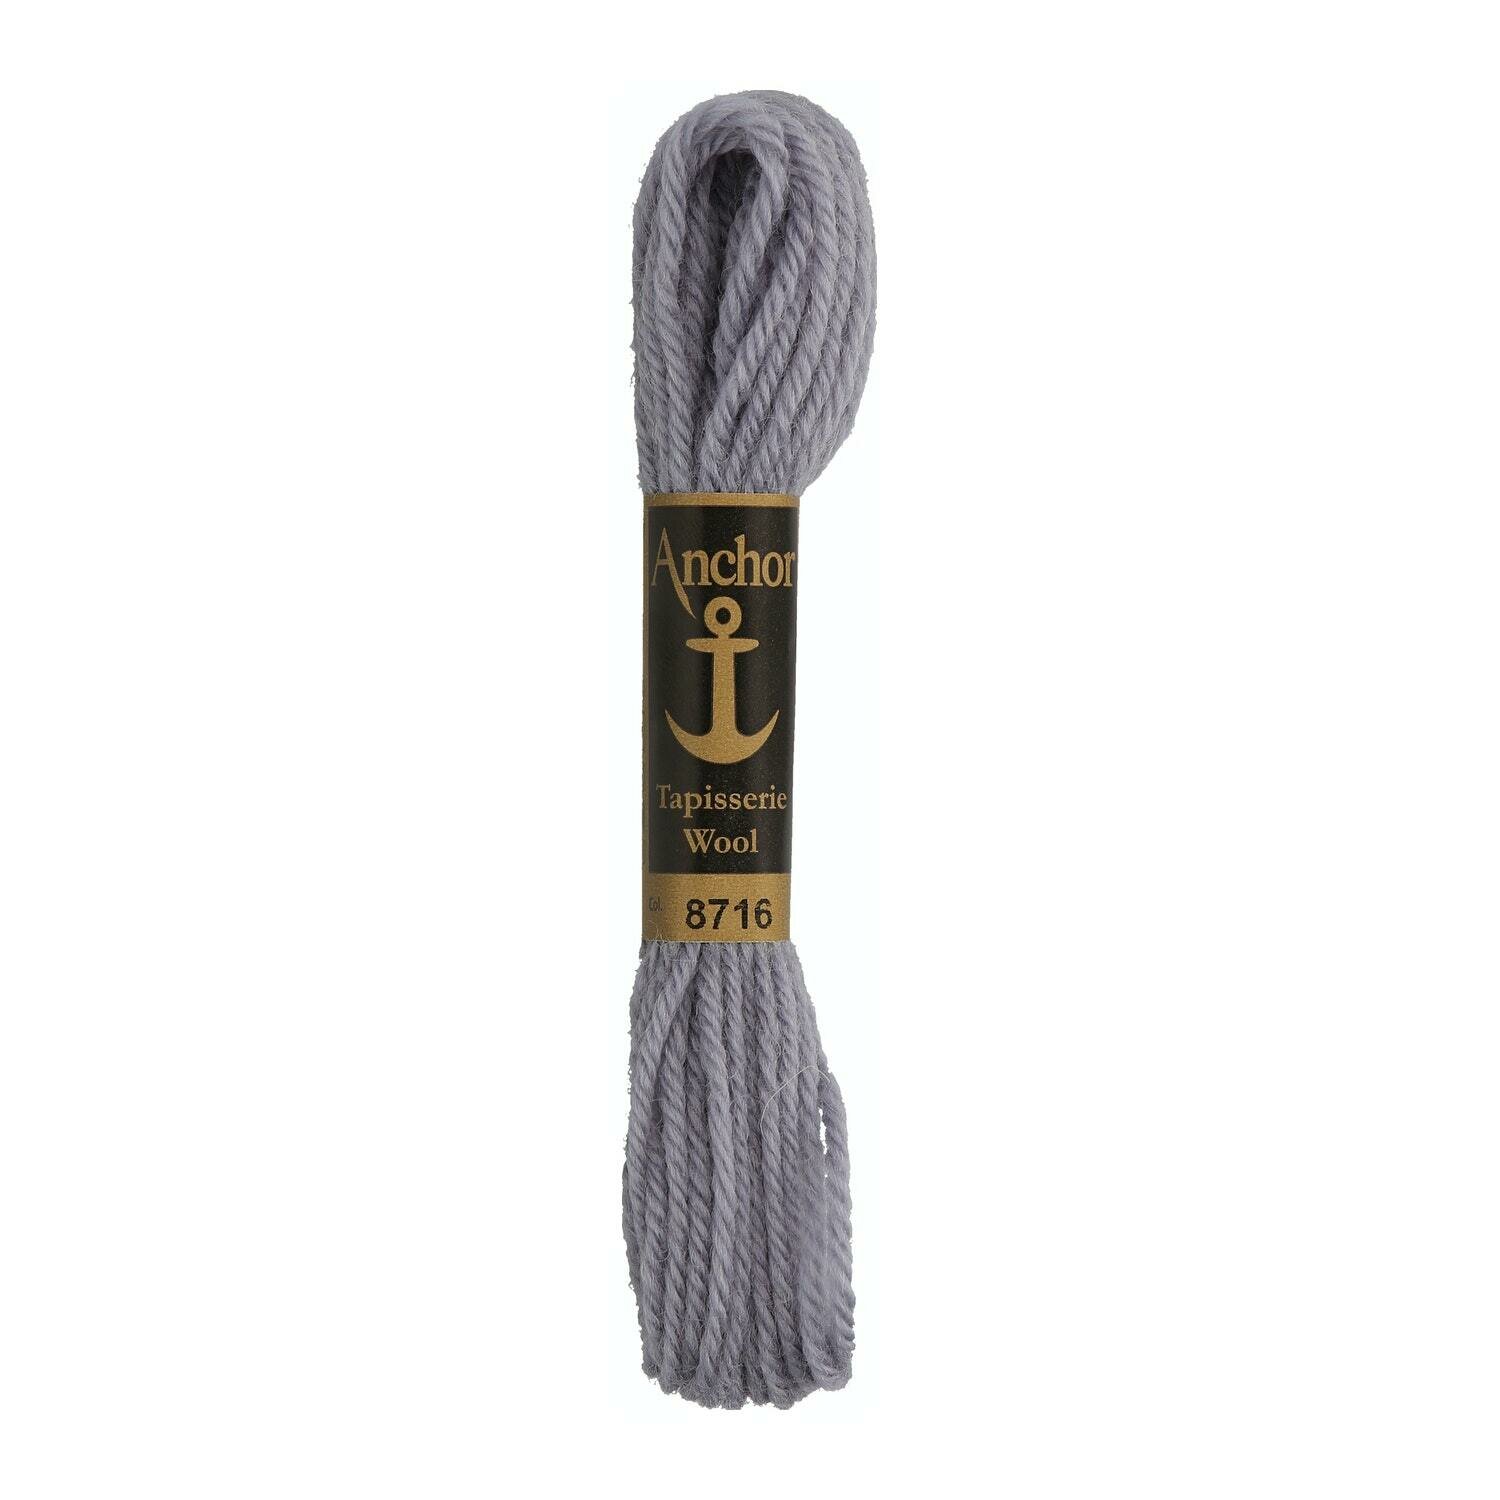 Anchor Tapisserie Wool #  08716